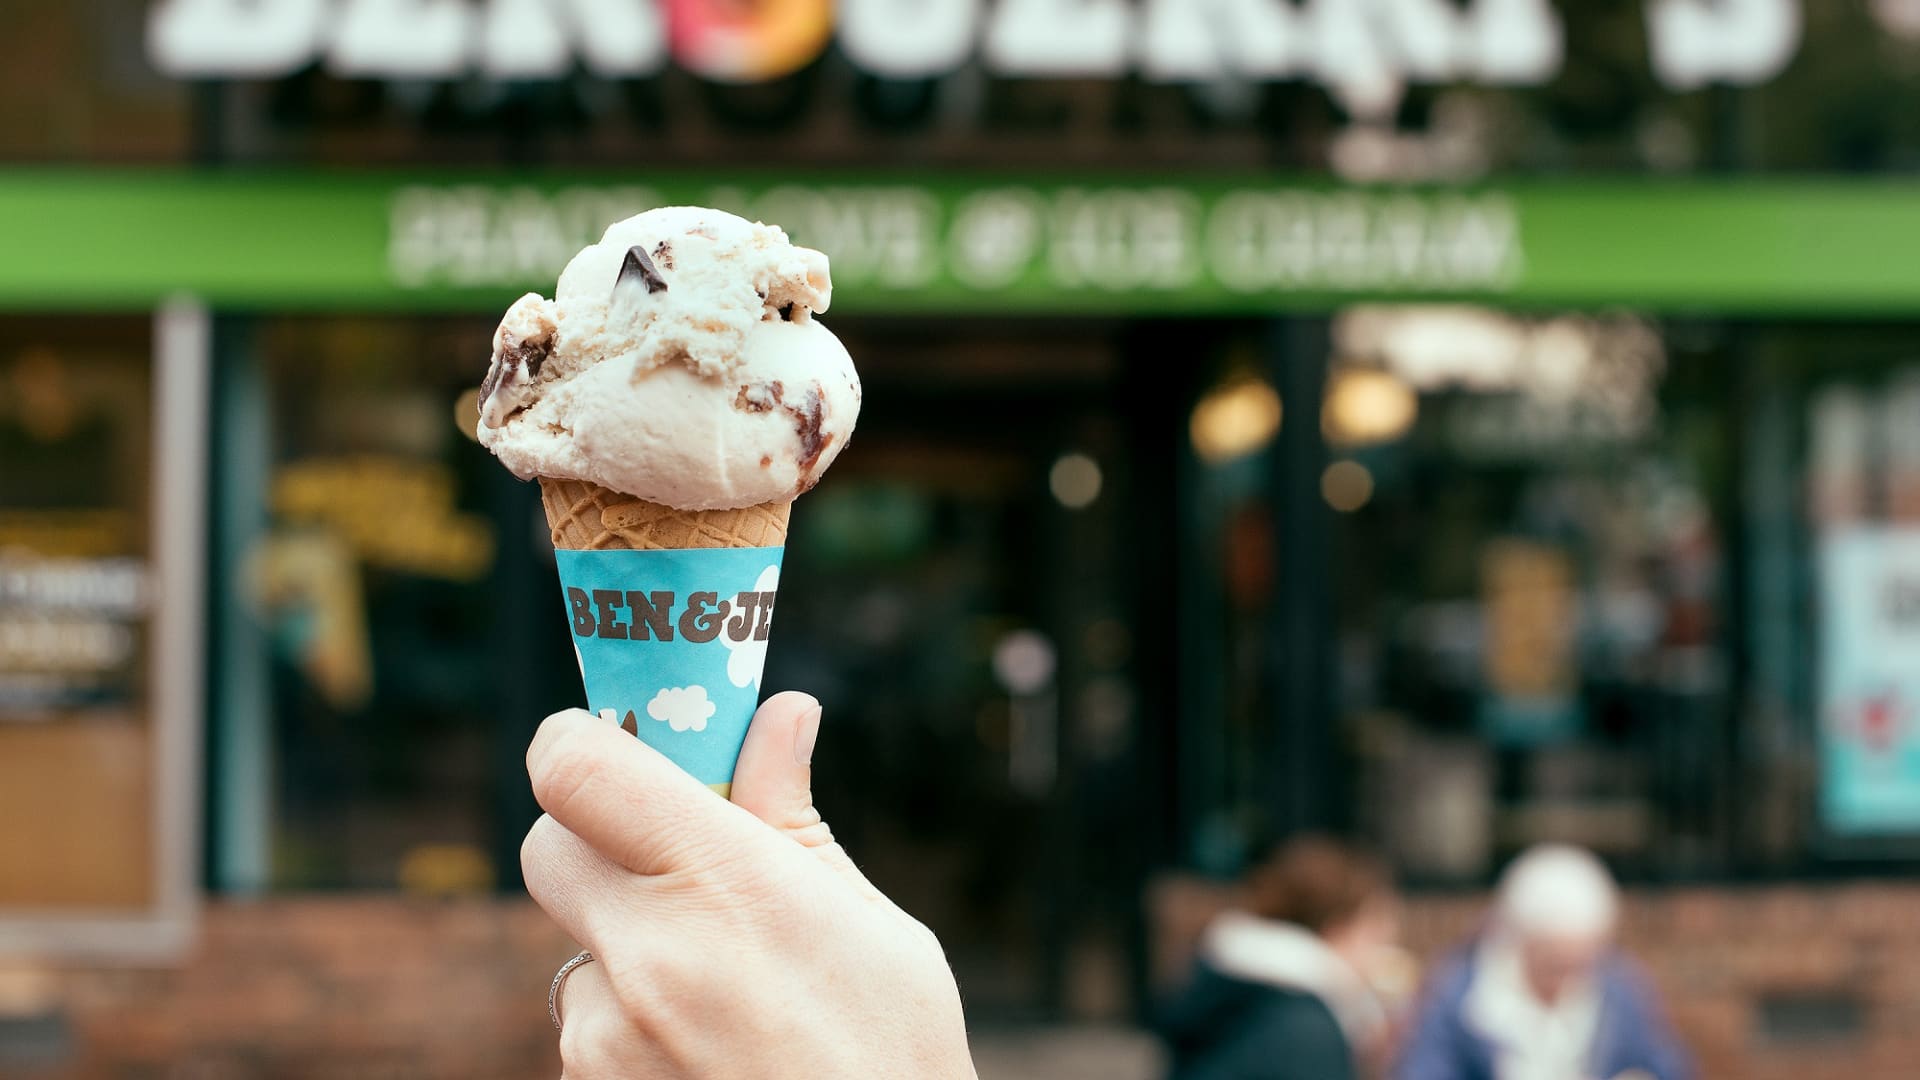 A scoop on Ben and Jerry's Cherry Garcia ice cream on Free Cone Day in 2016.